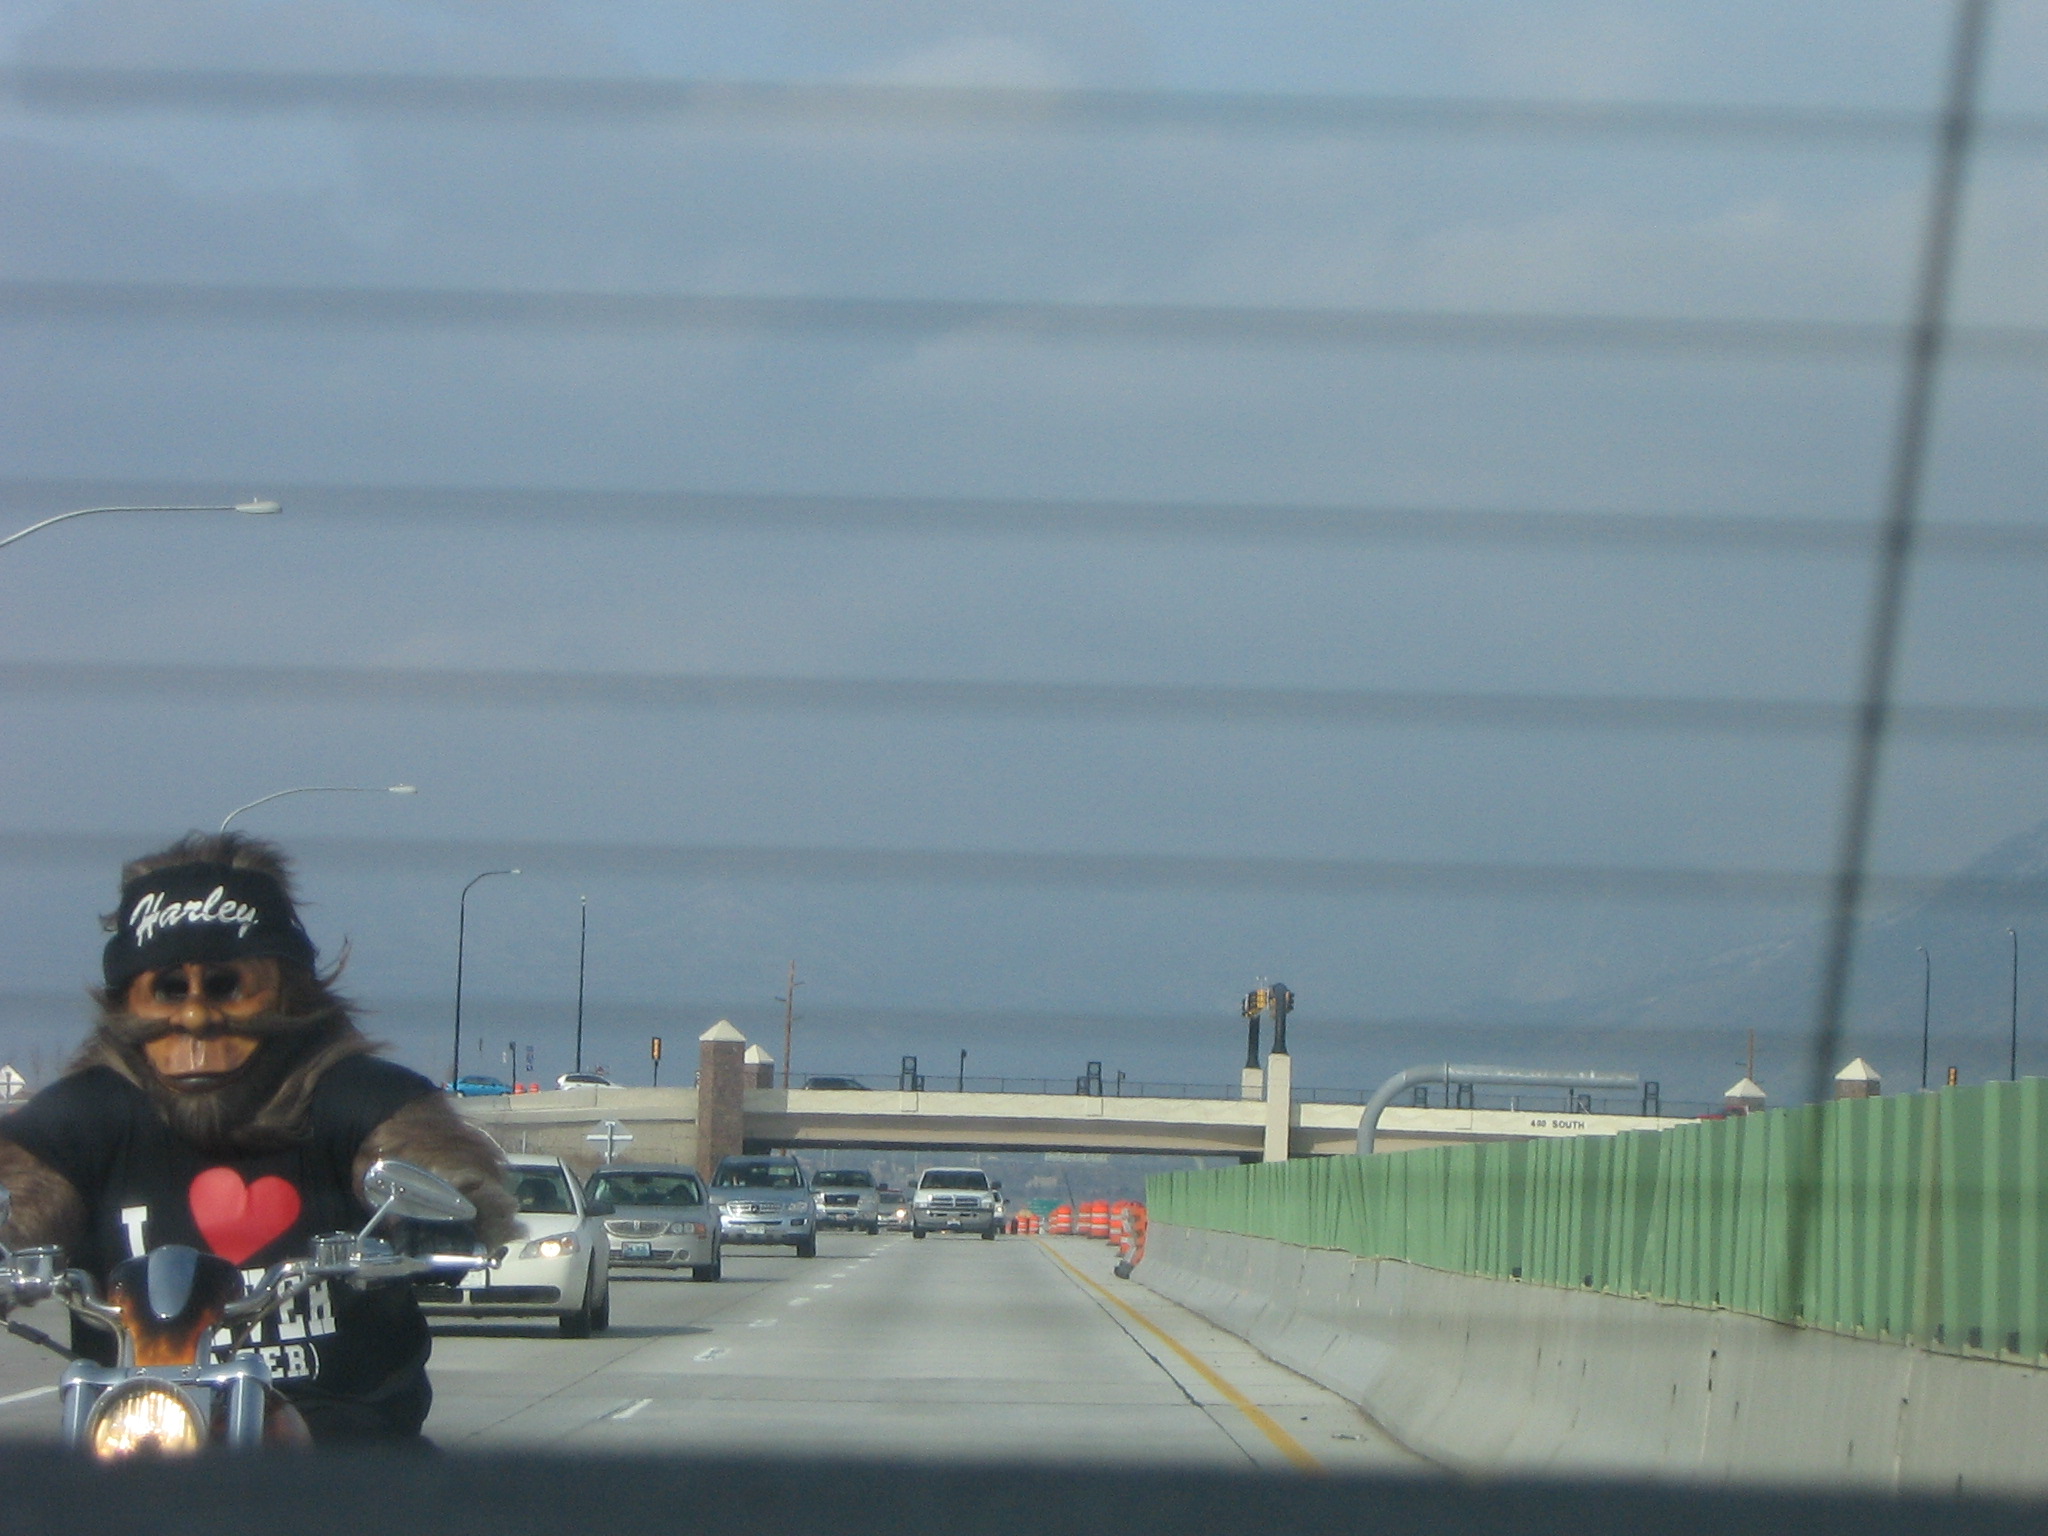 Another angle of chewbacca riding a motorcycle.